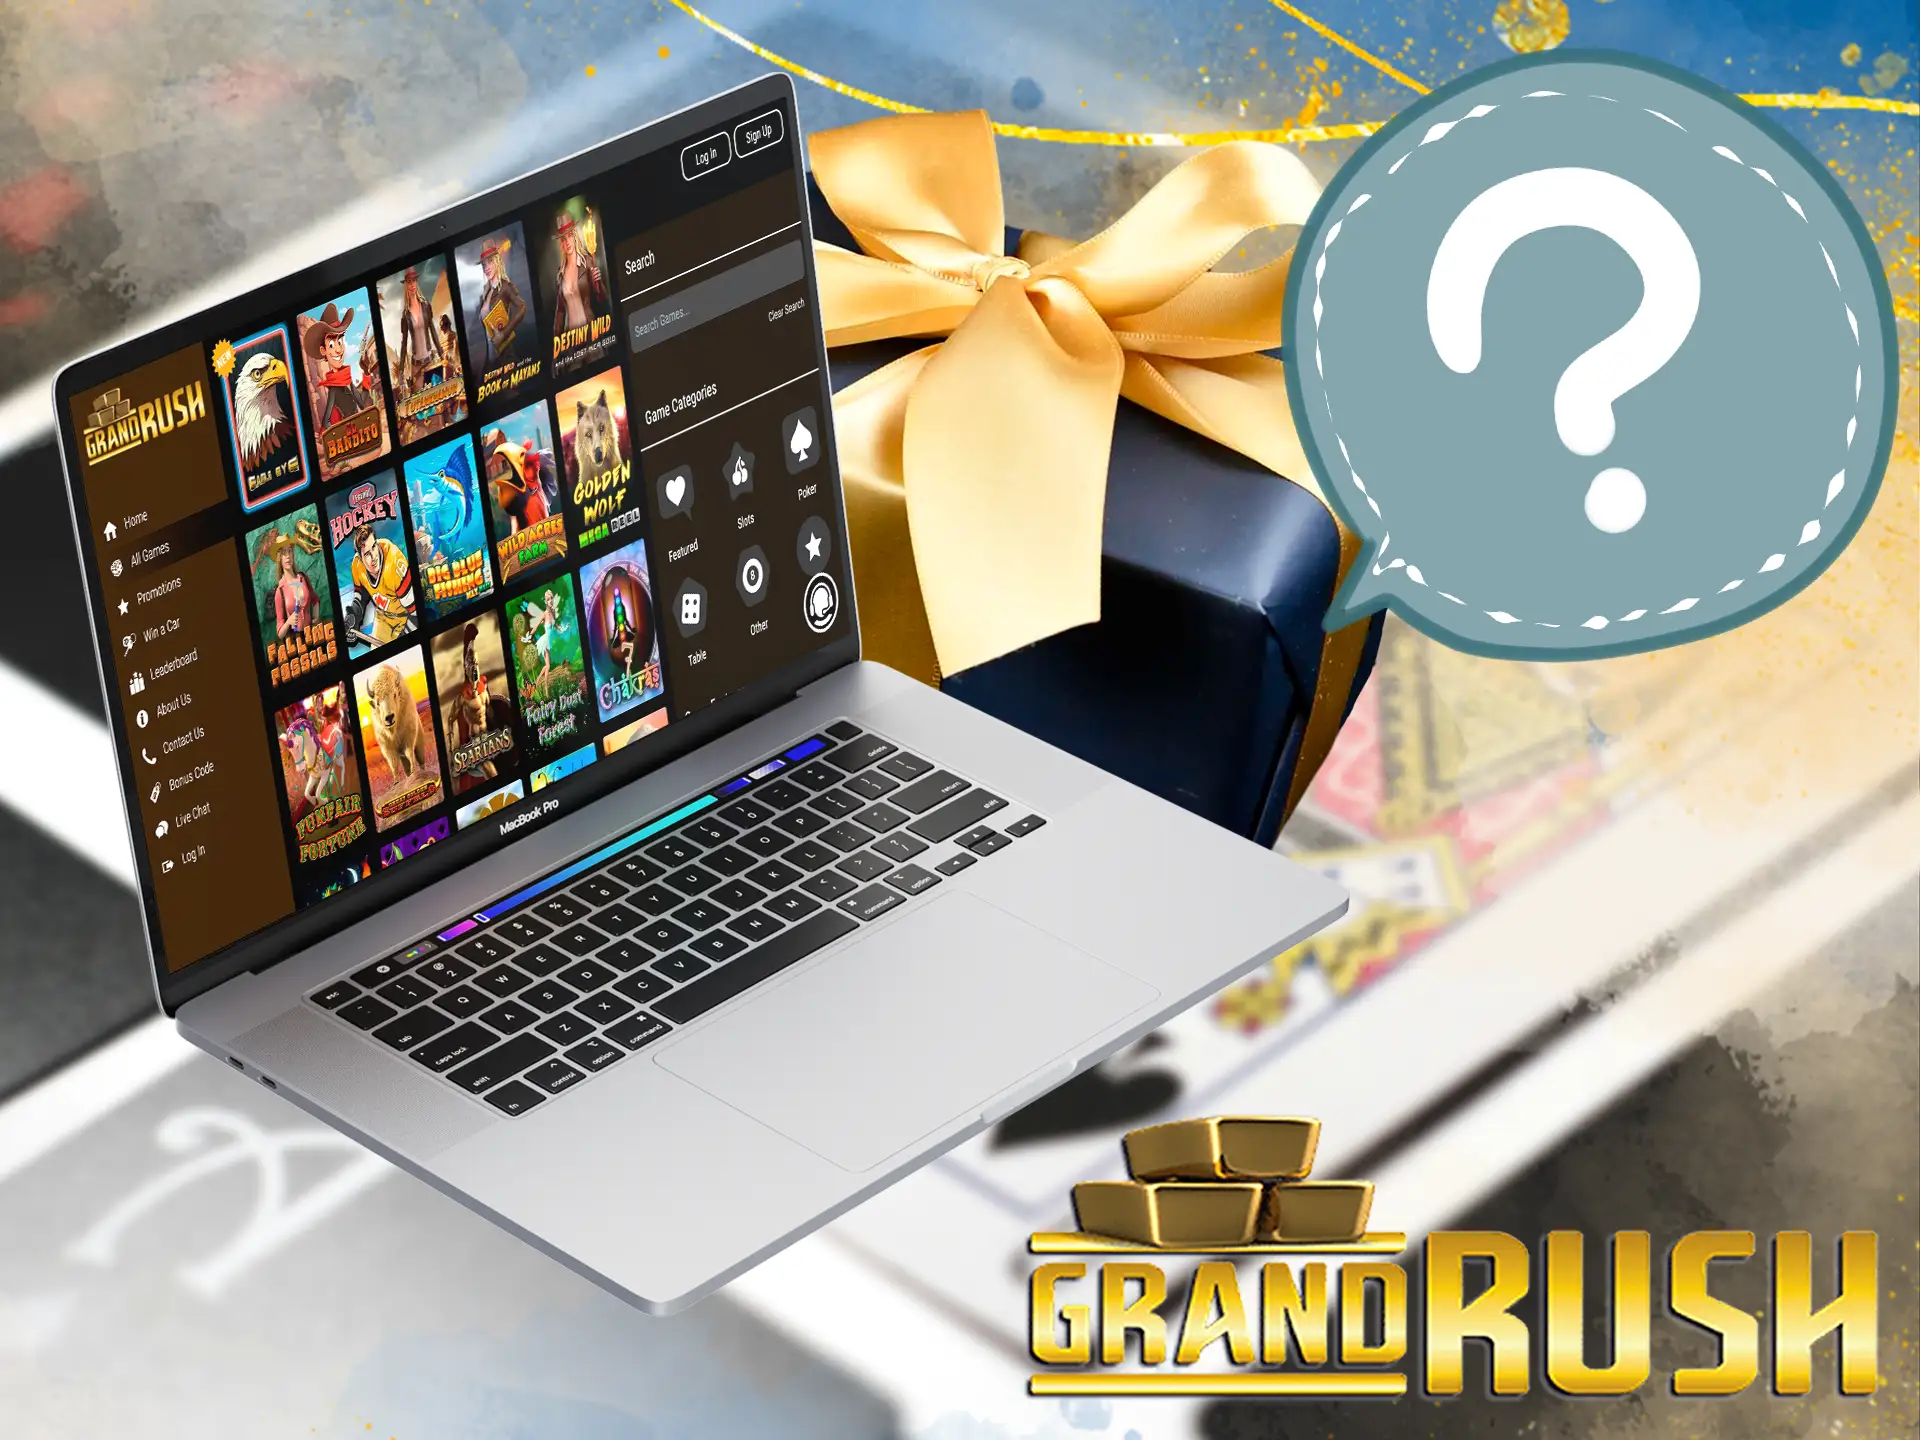 Enter Grand Rush free bonus code in the special box and get a bonus of up to 6,000 AUD.